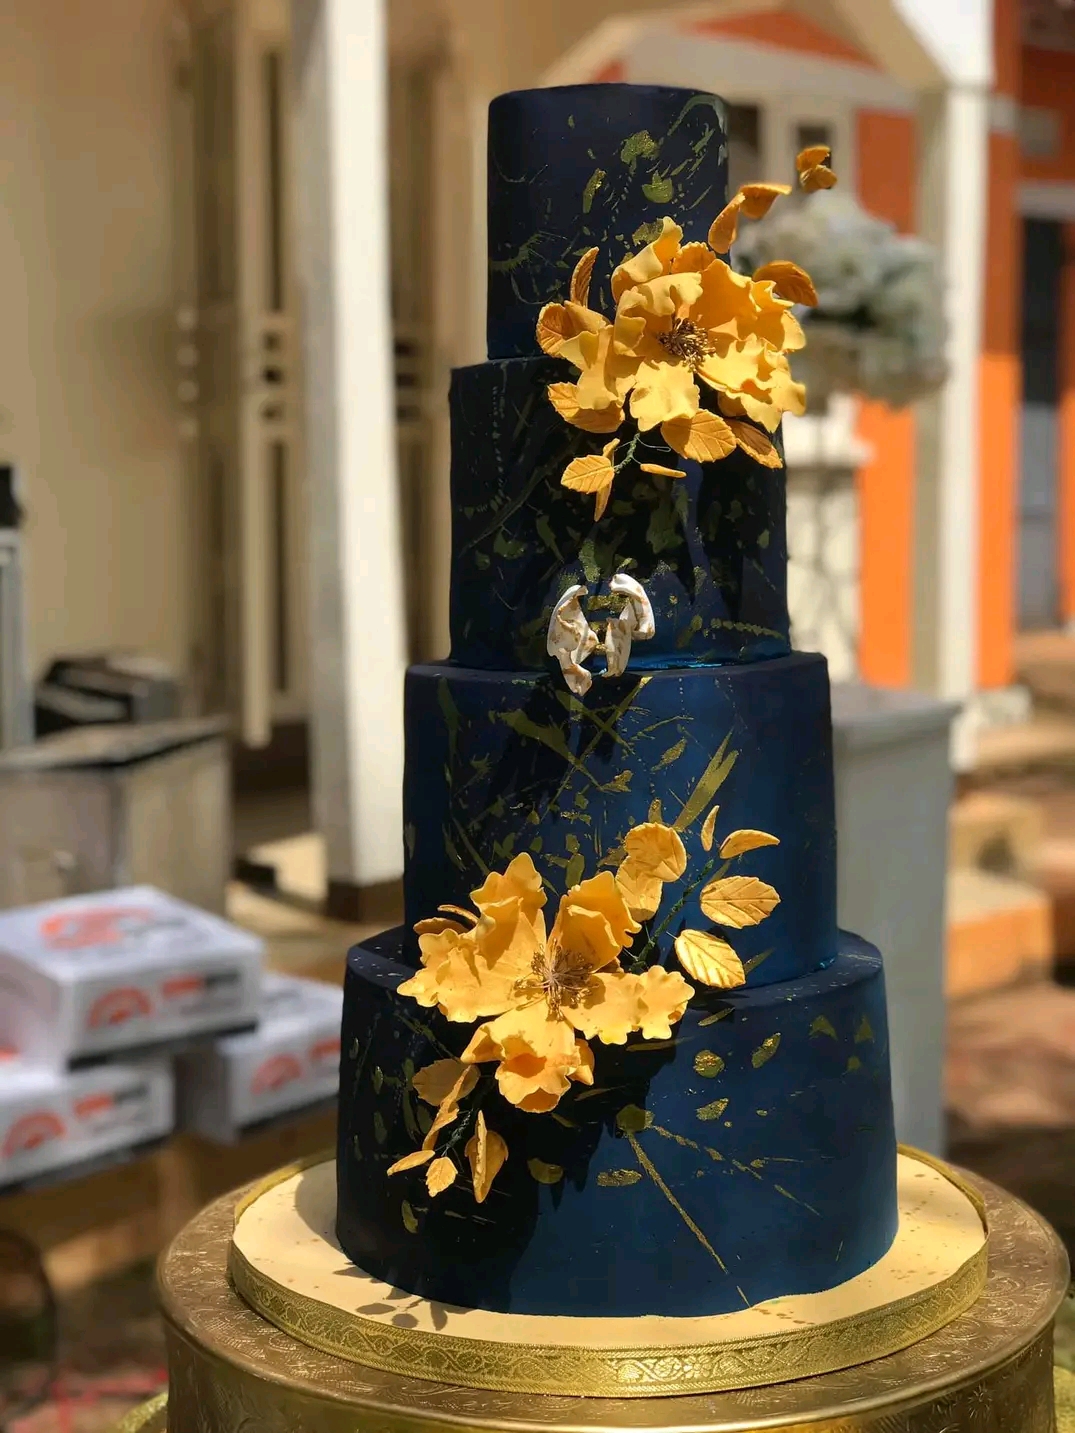 GOLD AND BLUE WEDDING CAKE 